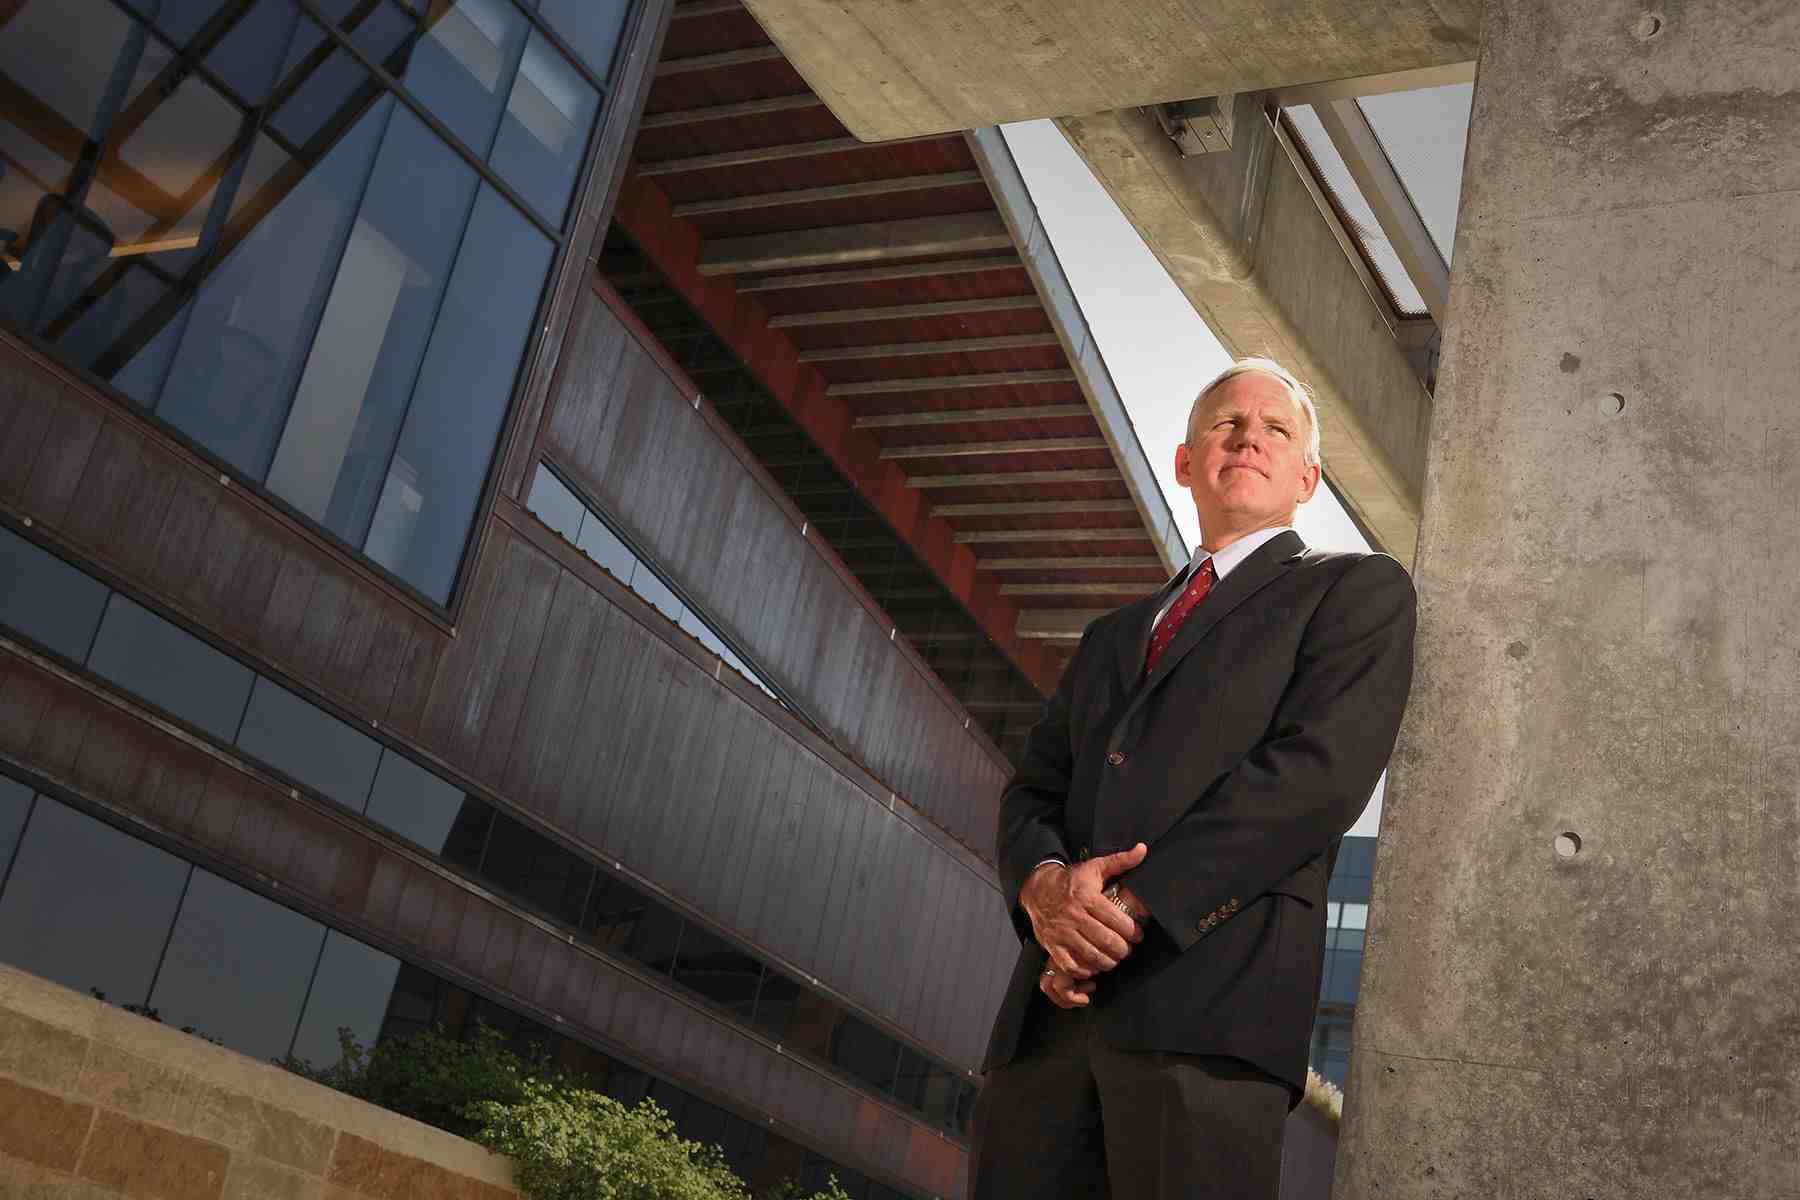 Architect's Professional Portrait Captured in a Business Photoshoot by C Ray Pictures.